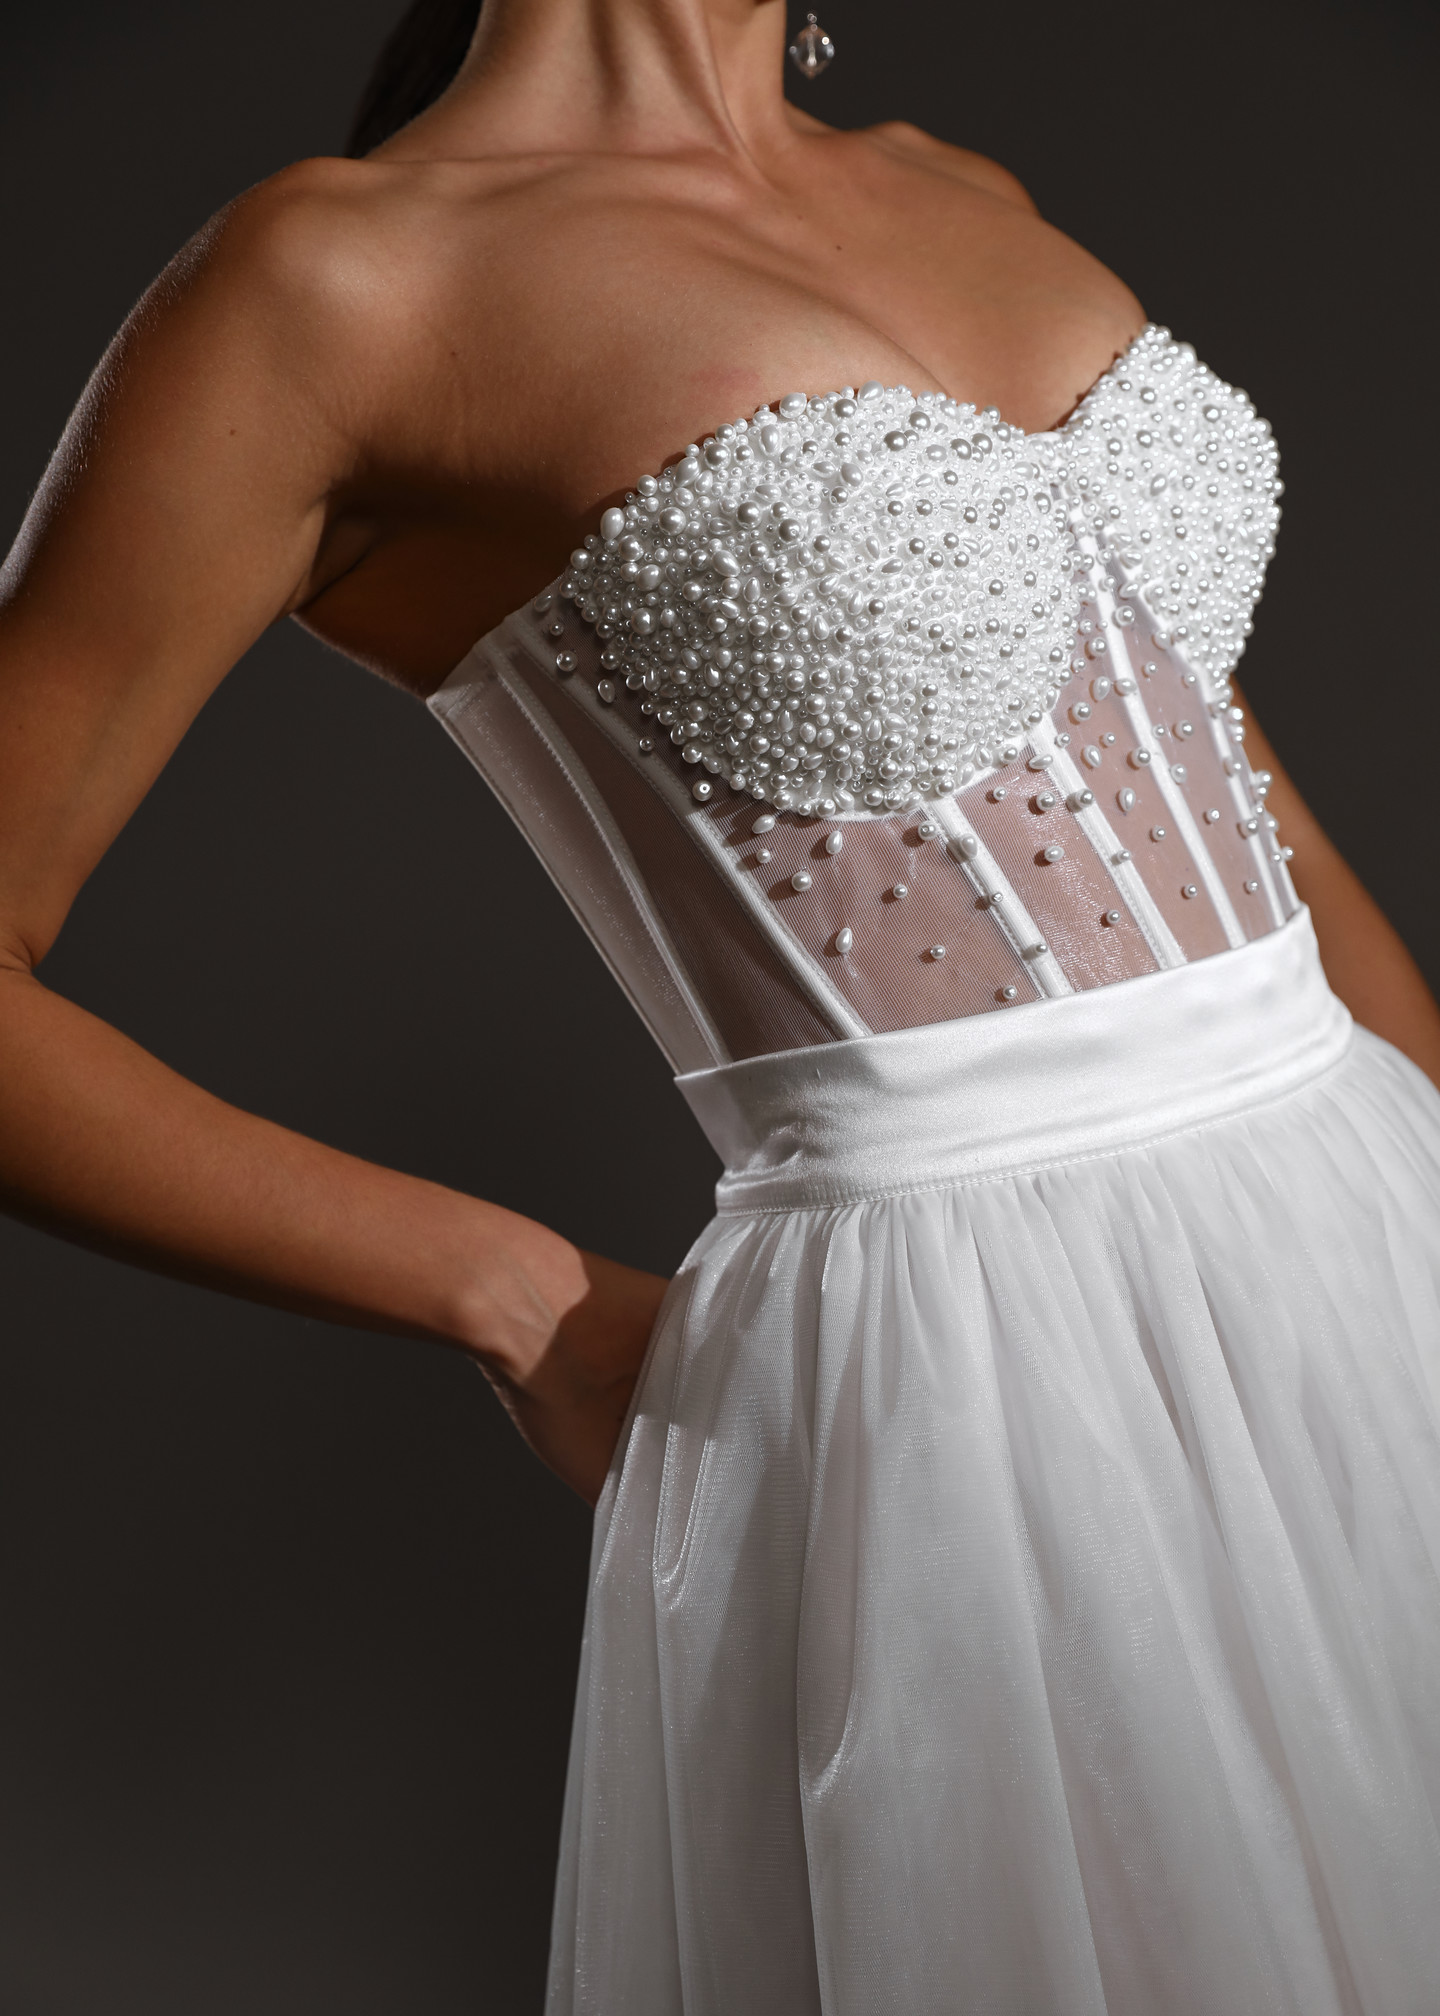 Beaded bustier, 2021, couture, top, bridal, off-white, bridal corset and skirt #2, embroidery, corset, offwhite kit beaded with crystals #1, popular